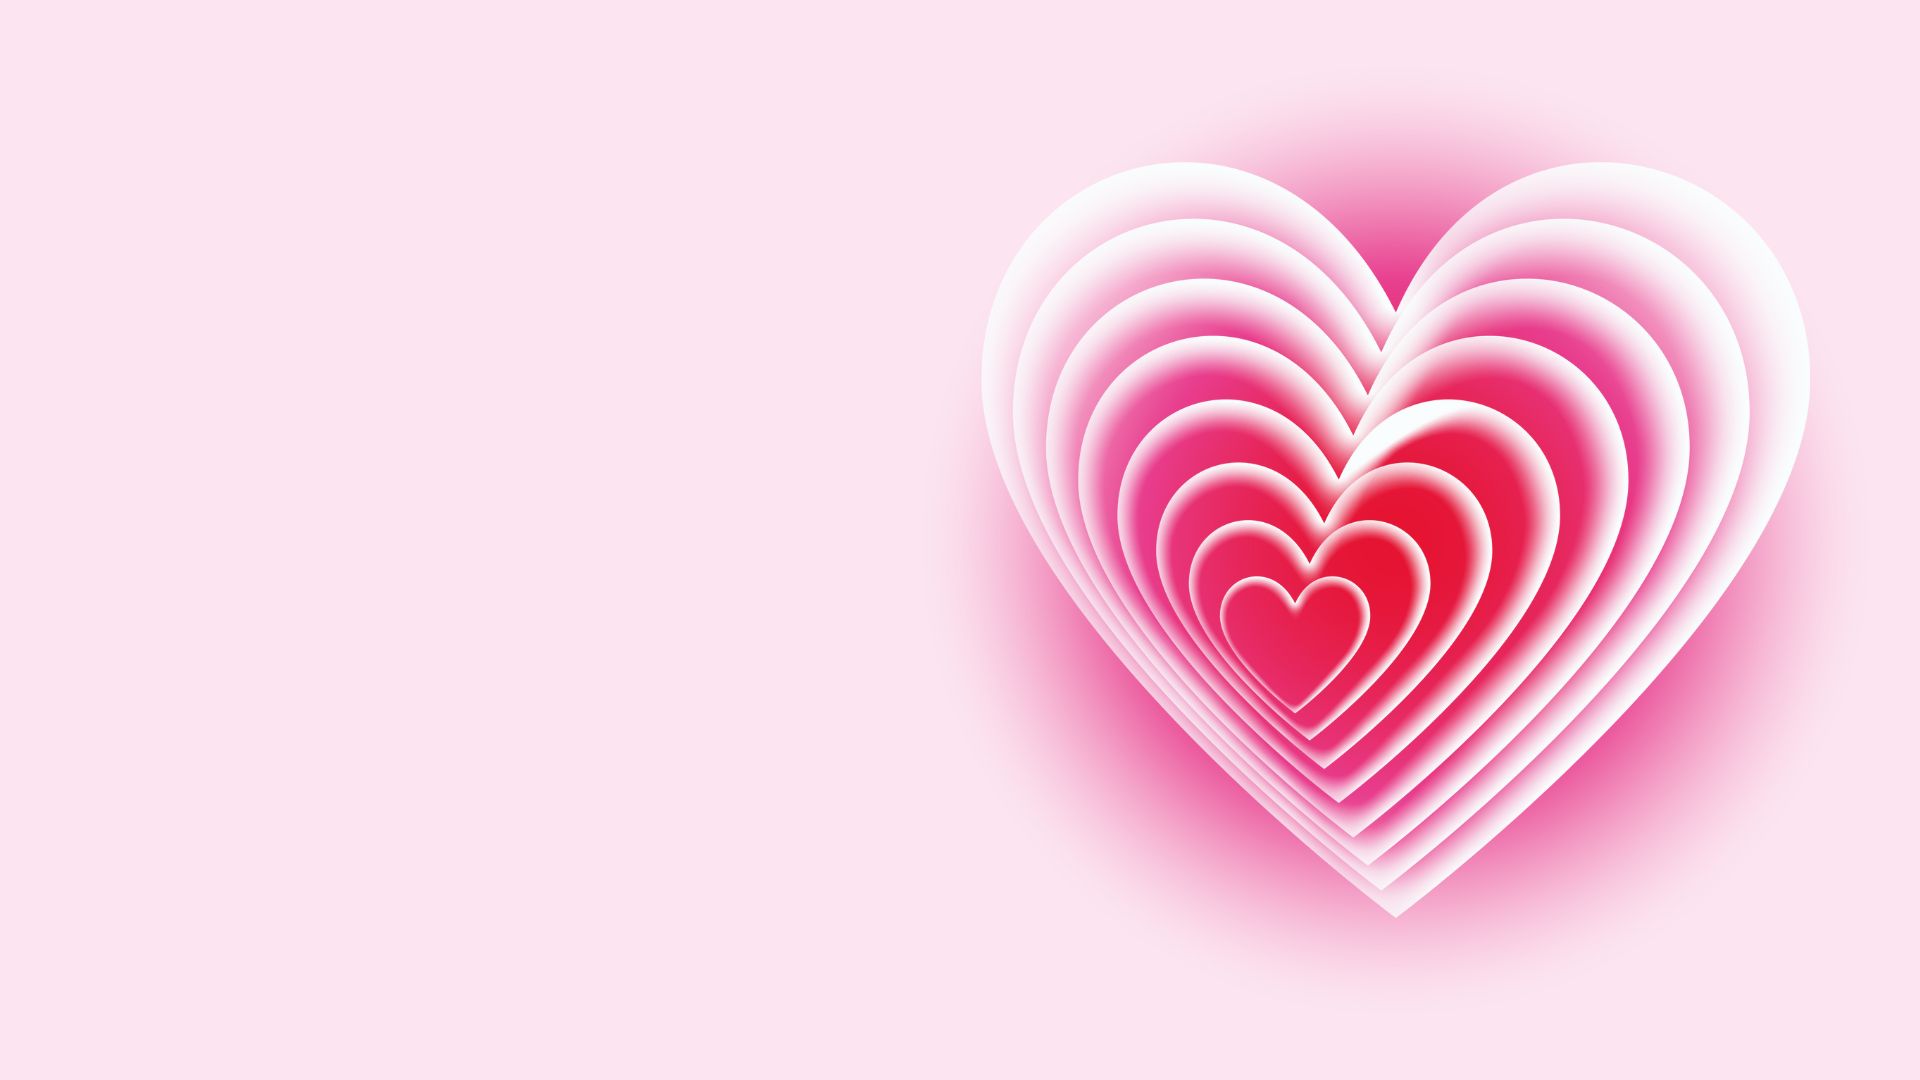 Love Hearts Background Images (1)